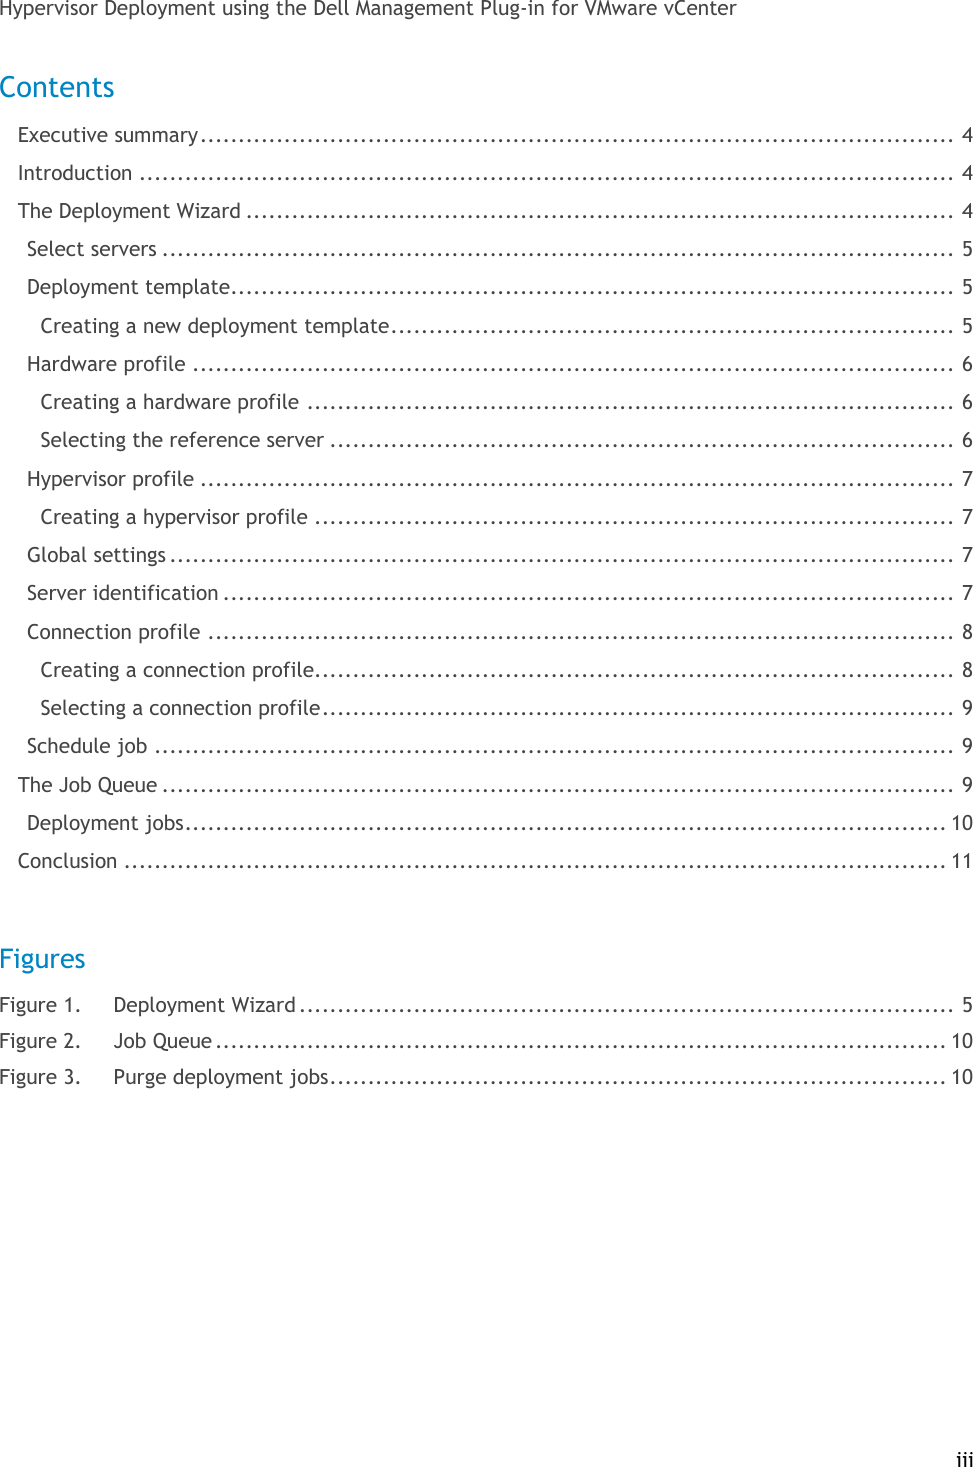 Page 3 of 11 - Dell Dell-Dell-Management-Plug-In-For-Vmware-Vcenter-1-6-Deployment-Guide- Management Plug-in  Dell-dell-management-plug-in-for-vmware-vcenter-1-6-deployment-guide